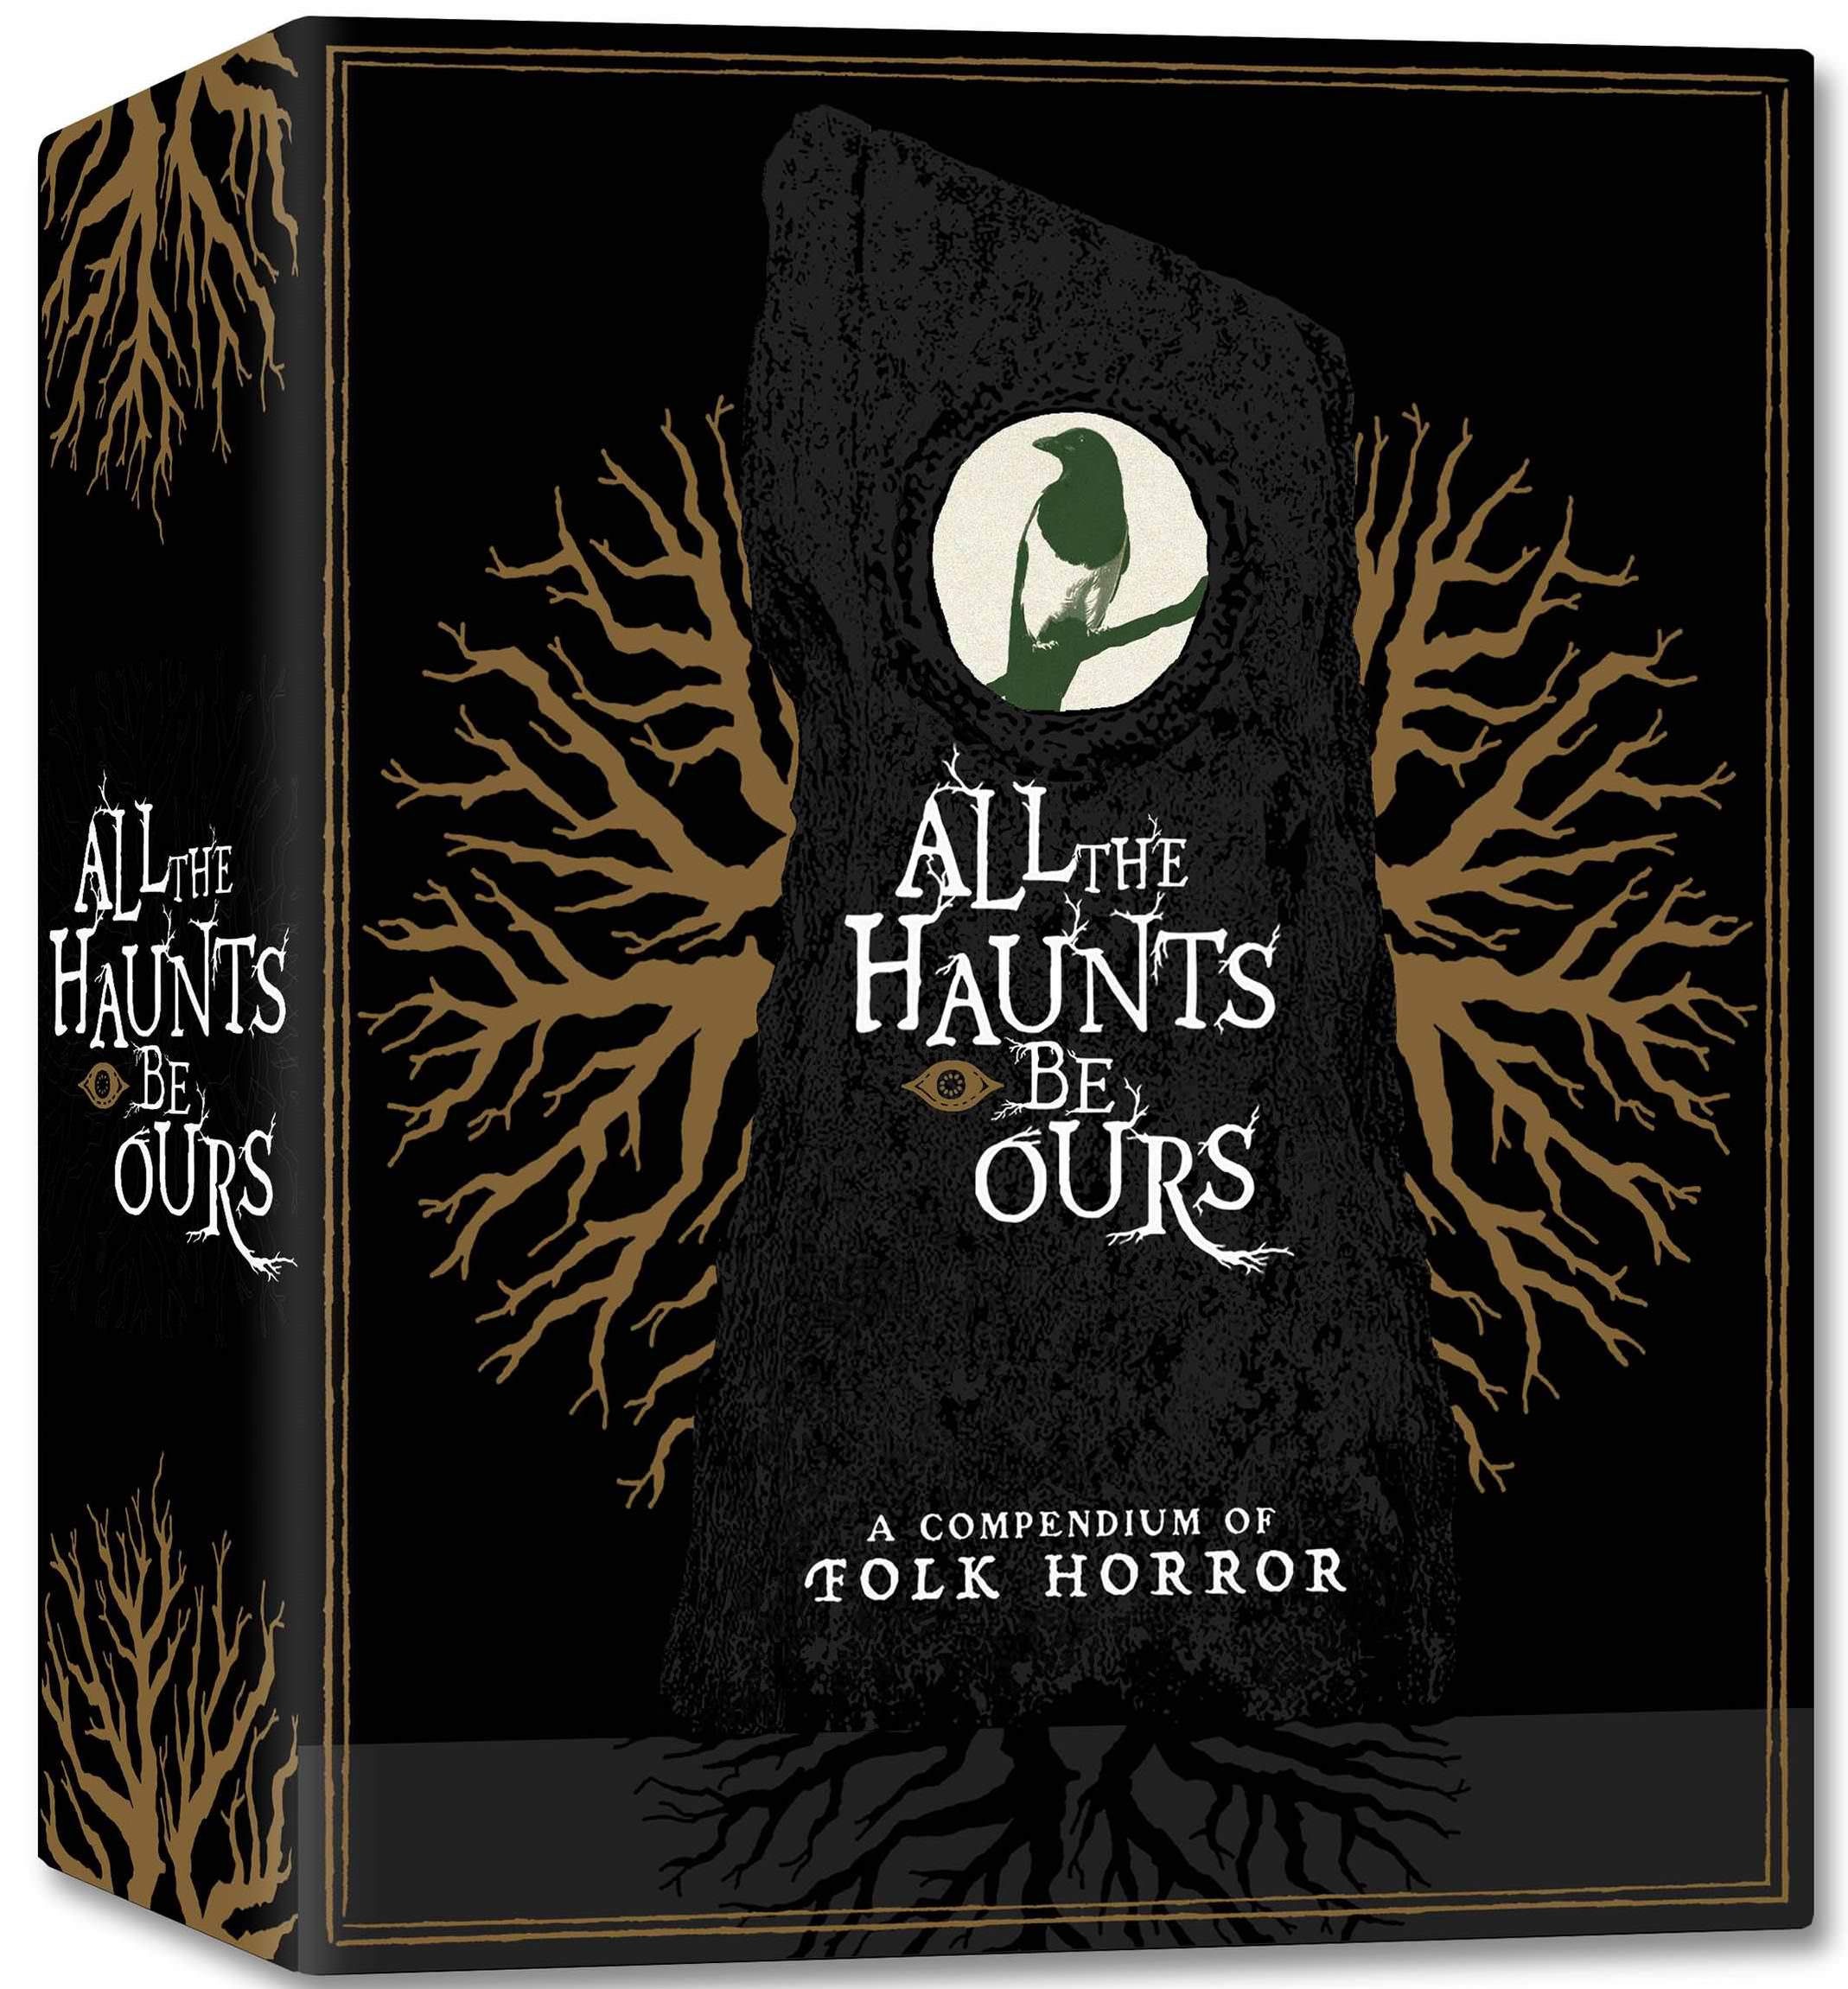 Haunts　–　Horror　A　Folk　Ours:　Be　of　Compendium　the　All　B　Severin　[14-Disc　Blu-ray　Films